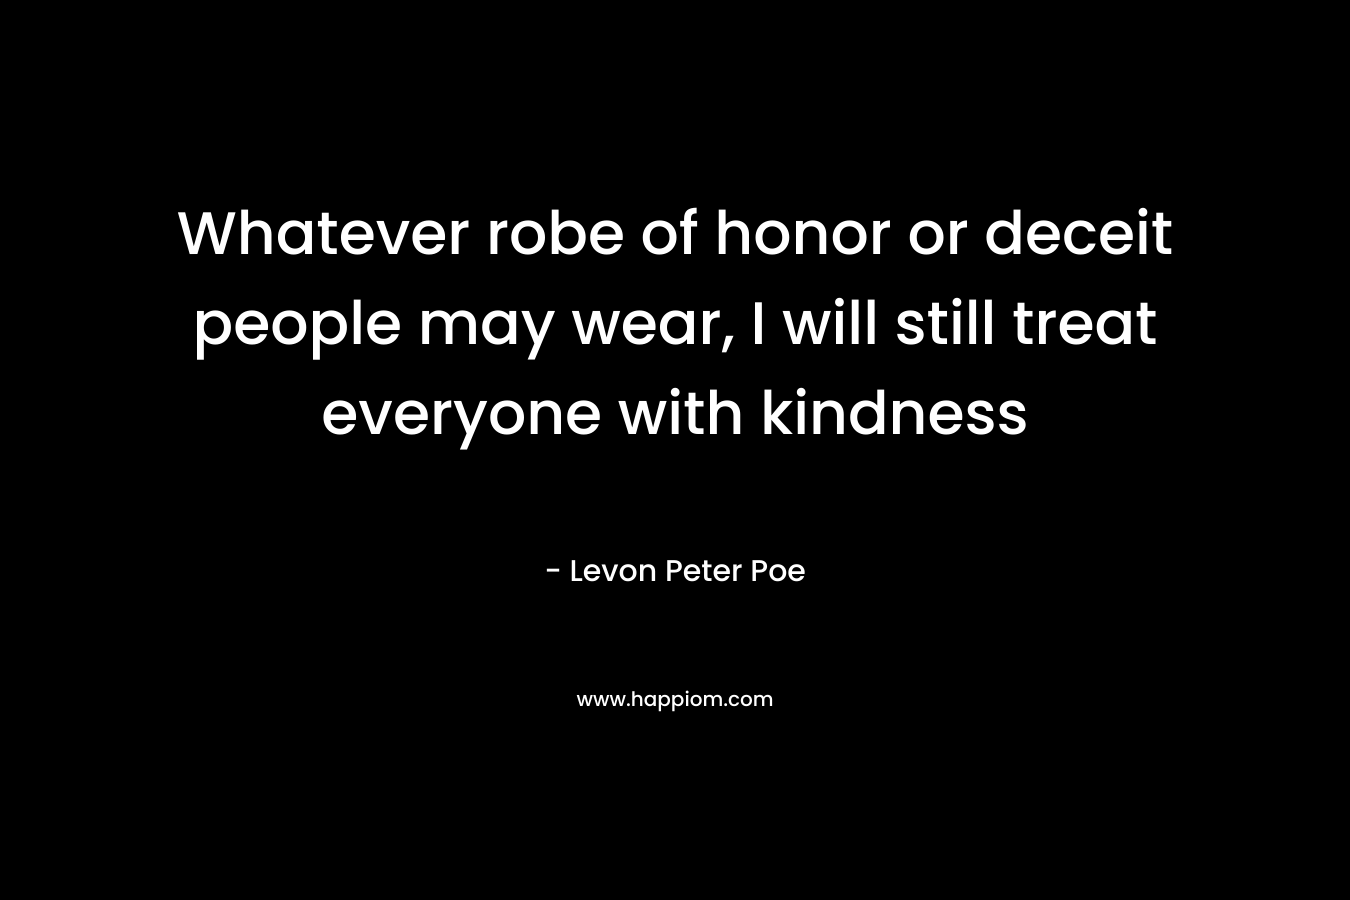 Whatever robe of honor or deceit people may wear, I will still treat everyone with kindness – Levon Peter Poe